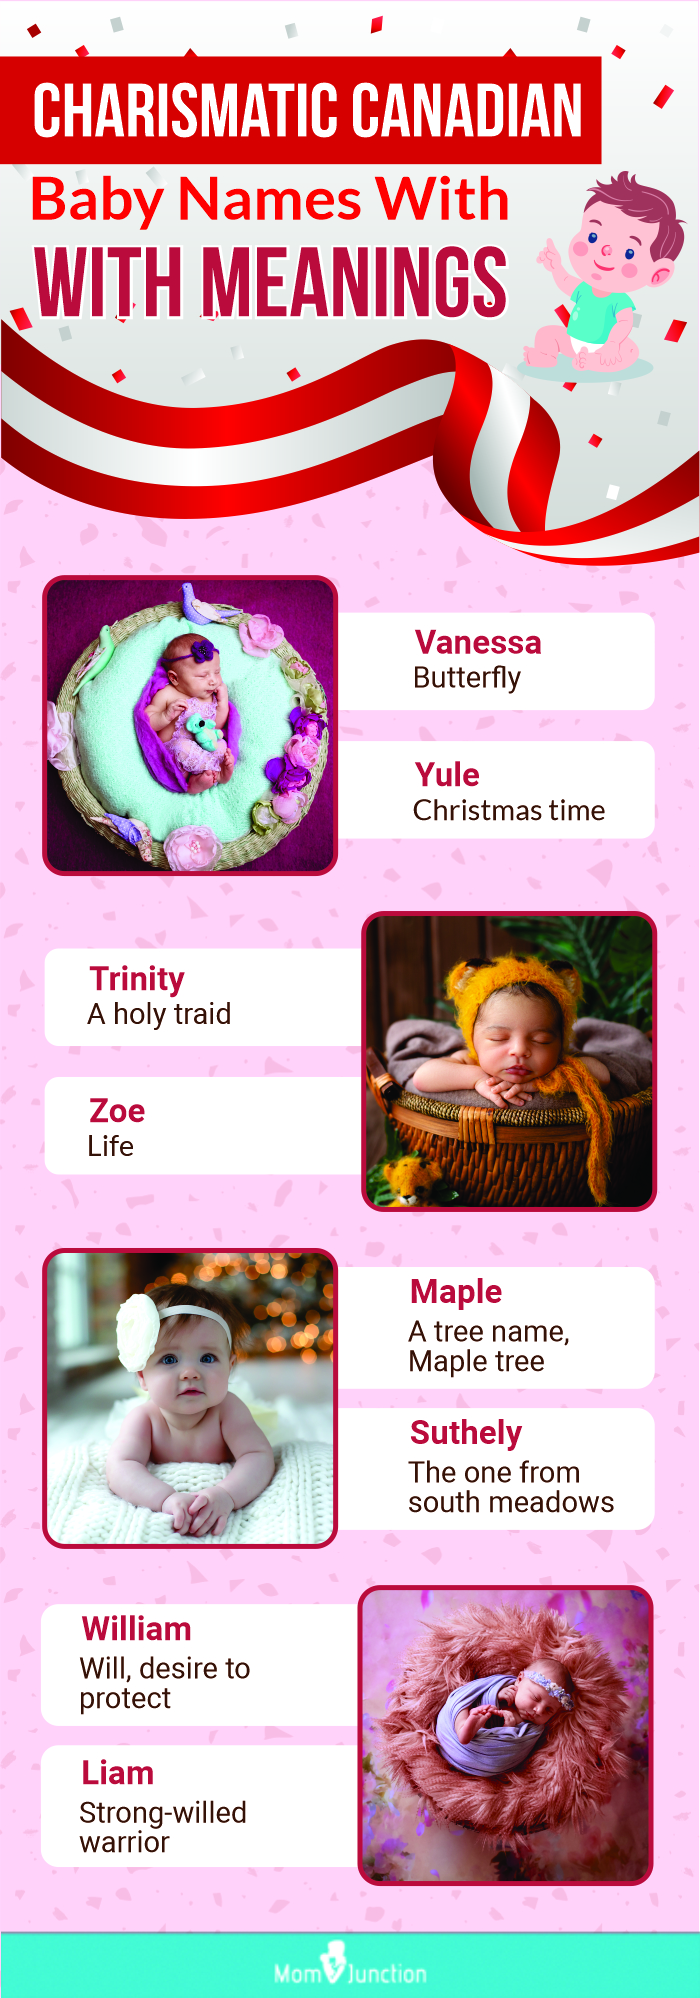 charismatic canadian baby names with meanings (infographic)